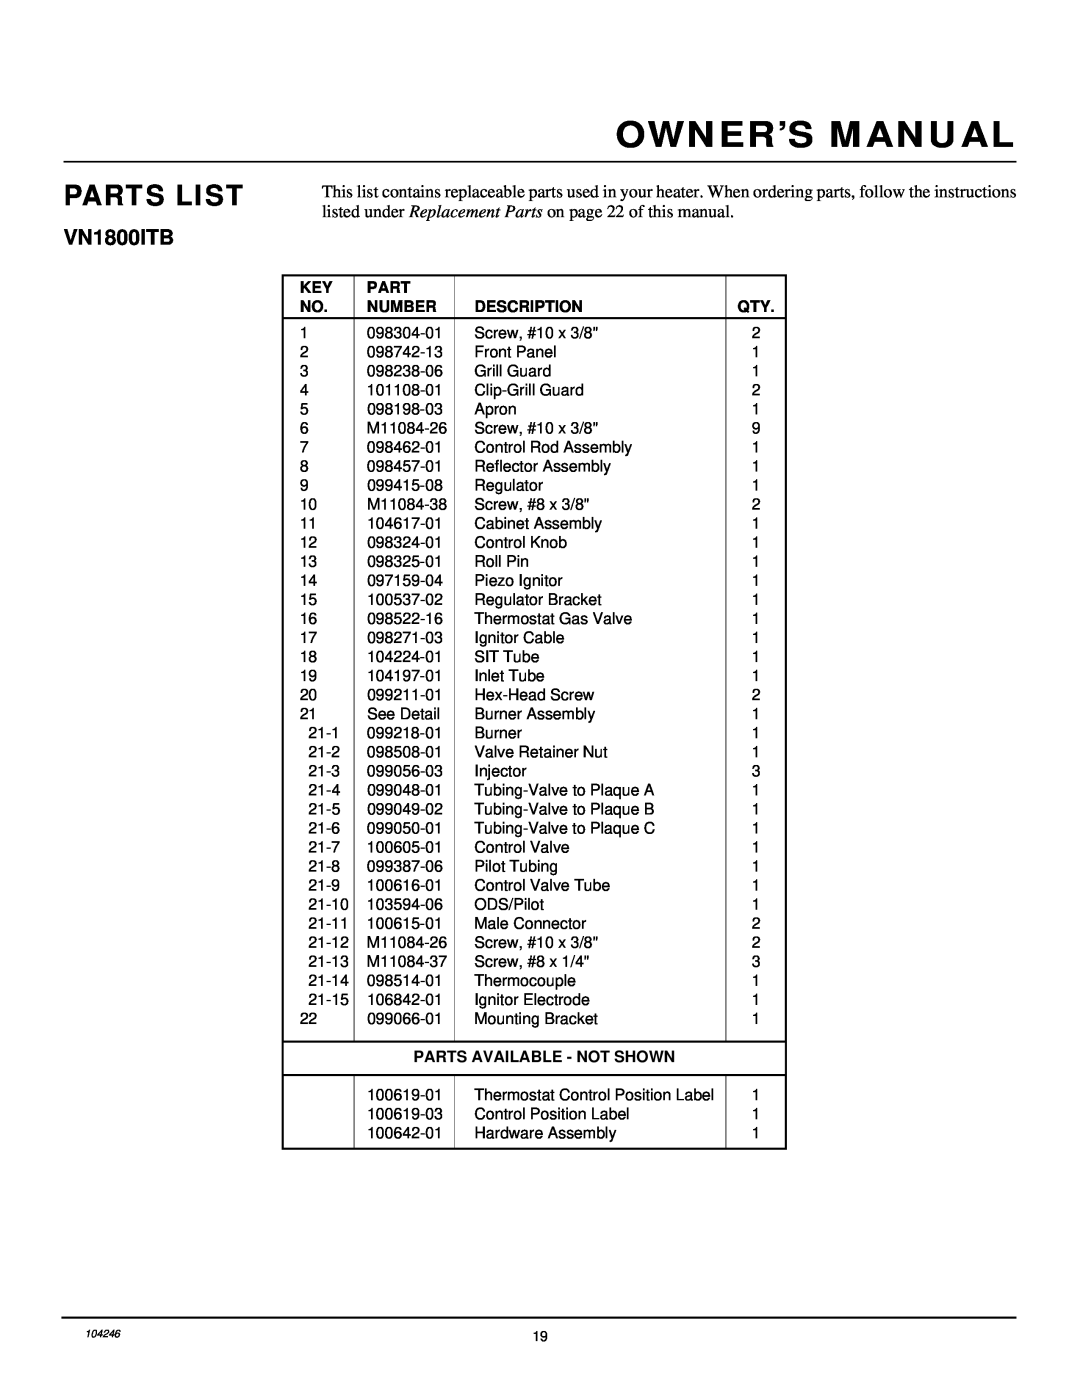 Vanguard Heating VN1800ITB, VN2550ITB installation manual Parts List, Number, Description, Parts Available - Not Shown 